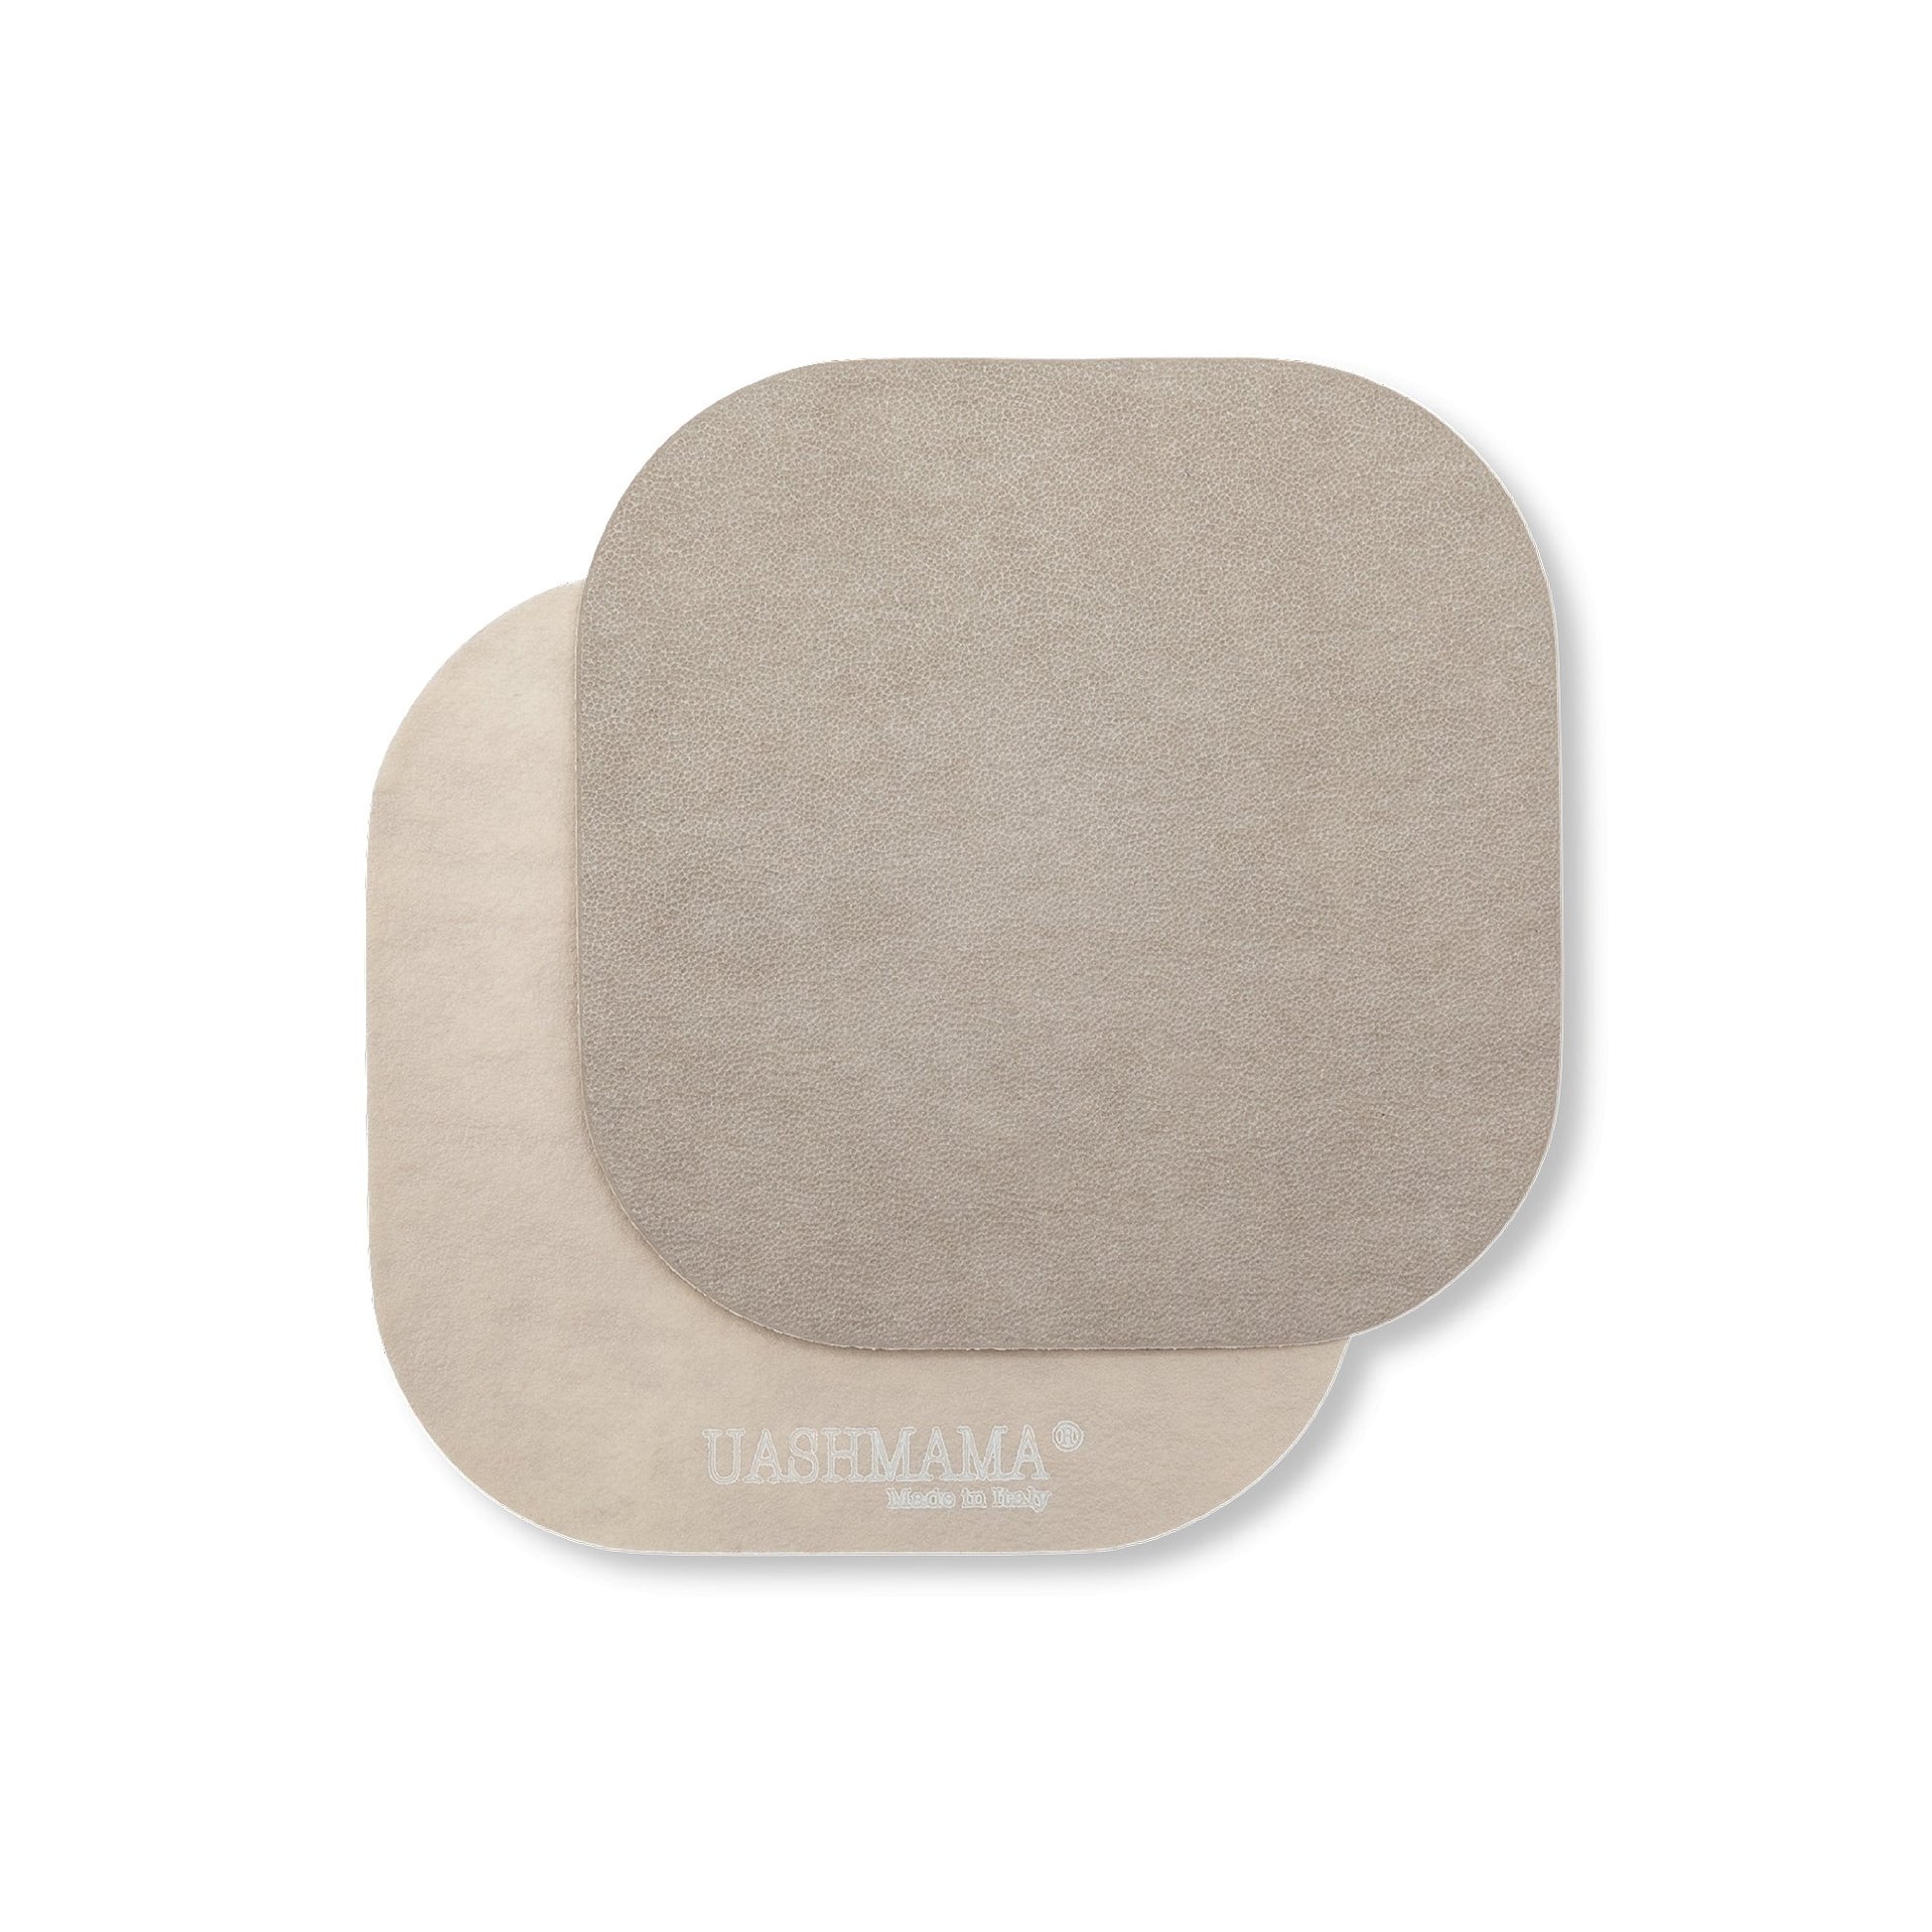 Two rounded edge square washable paper coasters lie one atop the other. The one in the foreground is grey and the one at rear is beige.